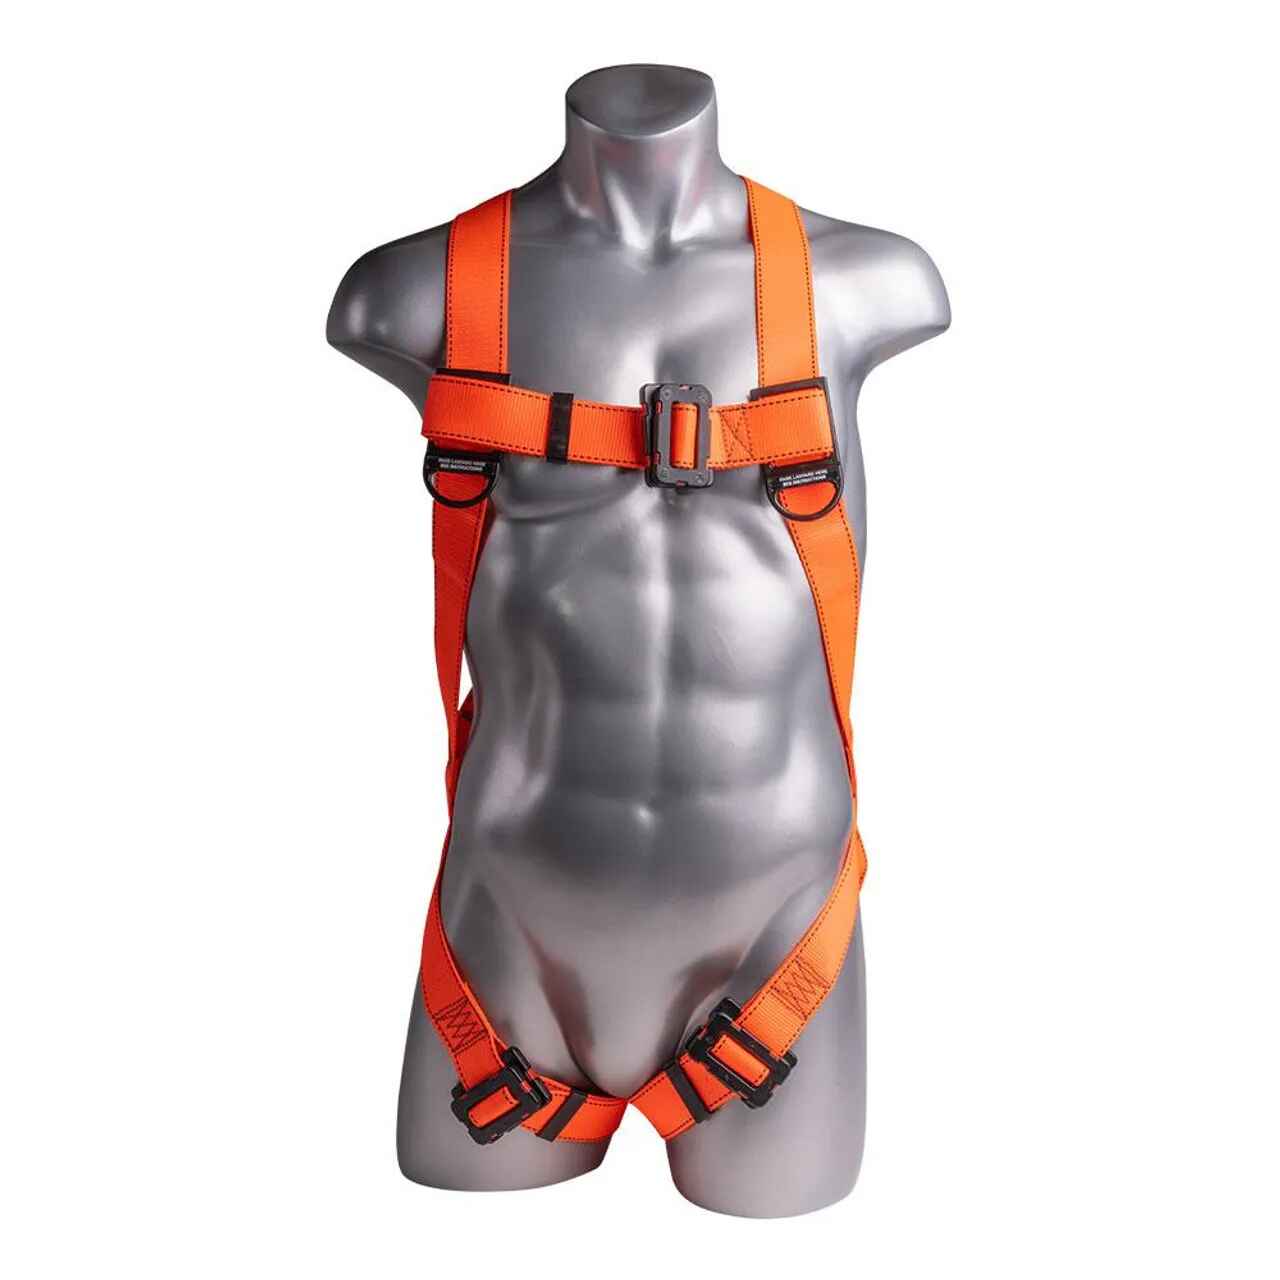 Construction Safety Harness 3 Point, Dielectric, Loop D-Ring, Orange - Defender Safety